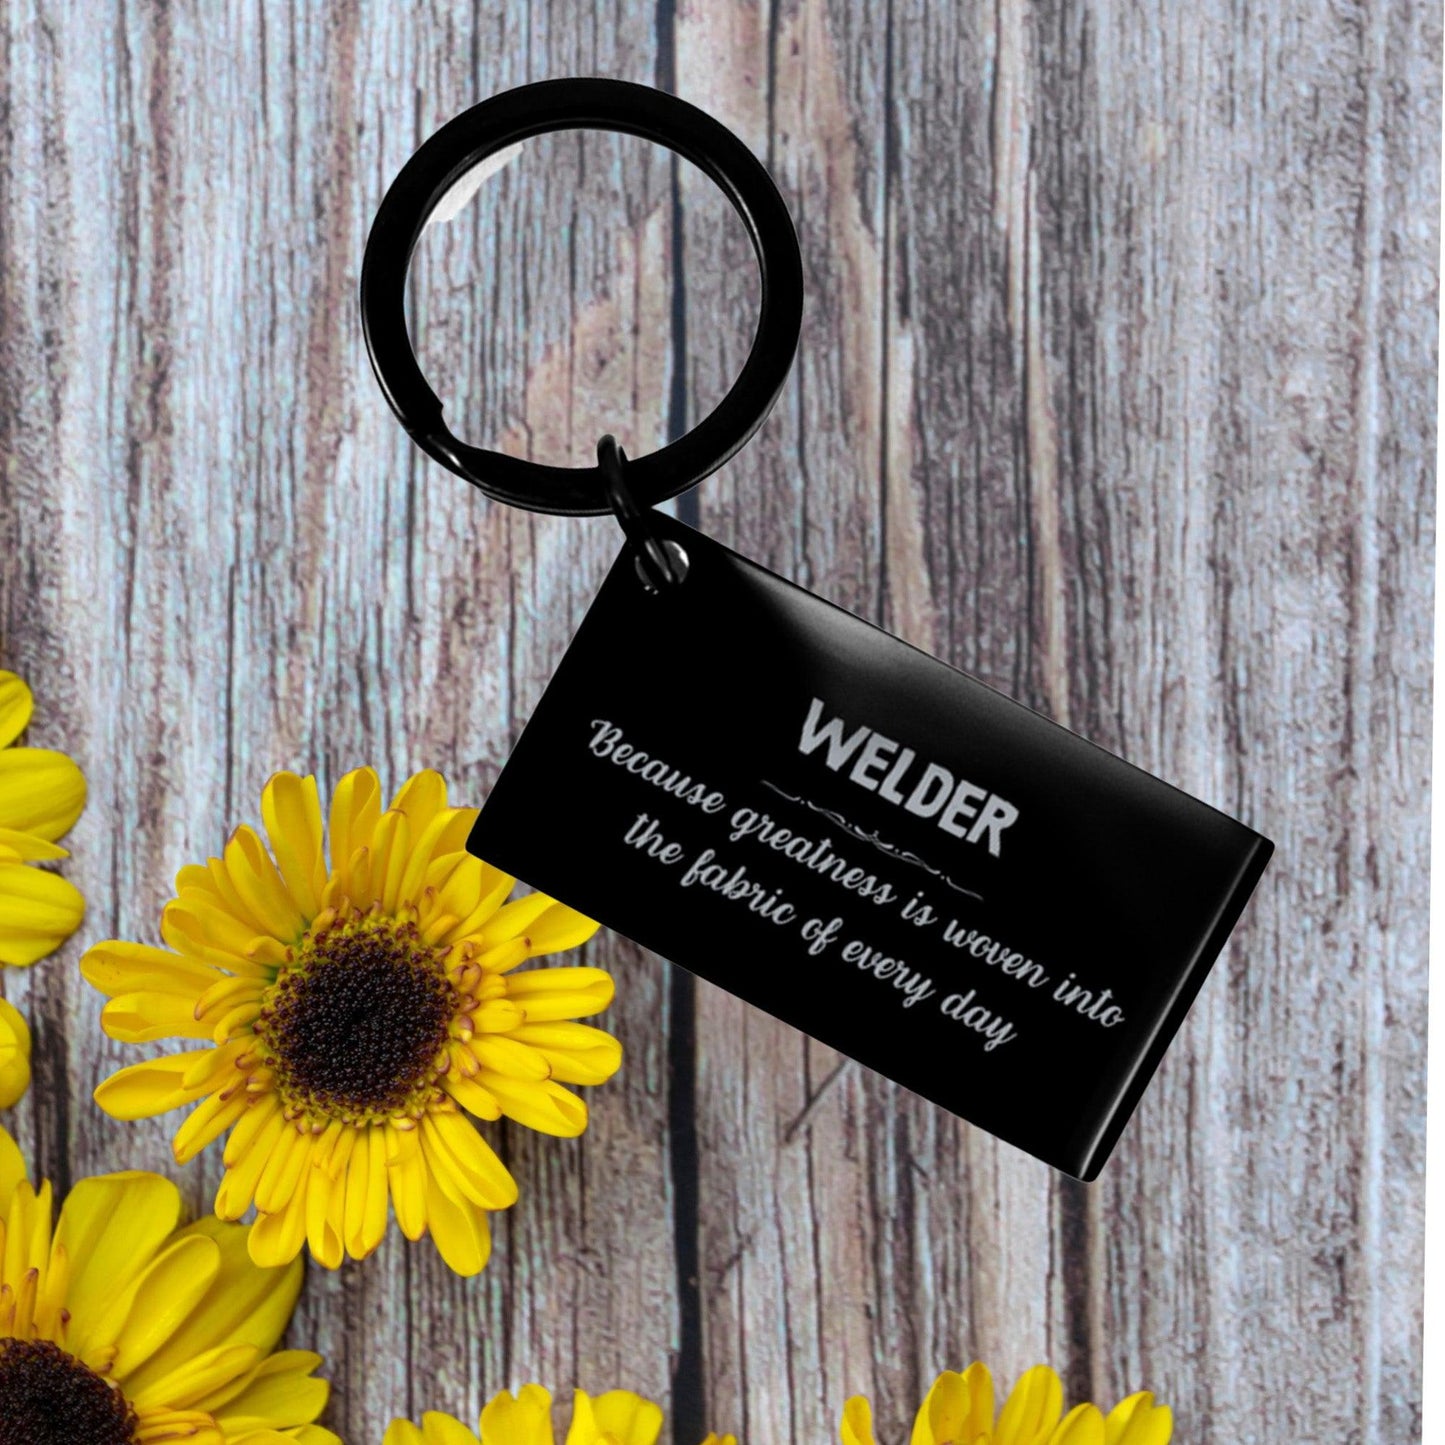 Sarcastic Welder Keychain Gifts, Christmas Holiday Gifts for Welder Birthday, Welder: Because greatness is woven into the fabric of every day, Coworkers, Friends - Mallard Moon Gift Shop